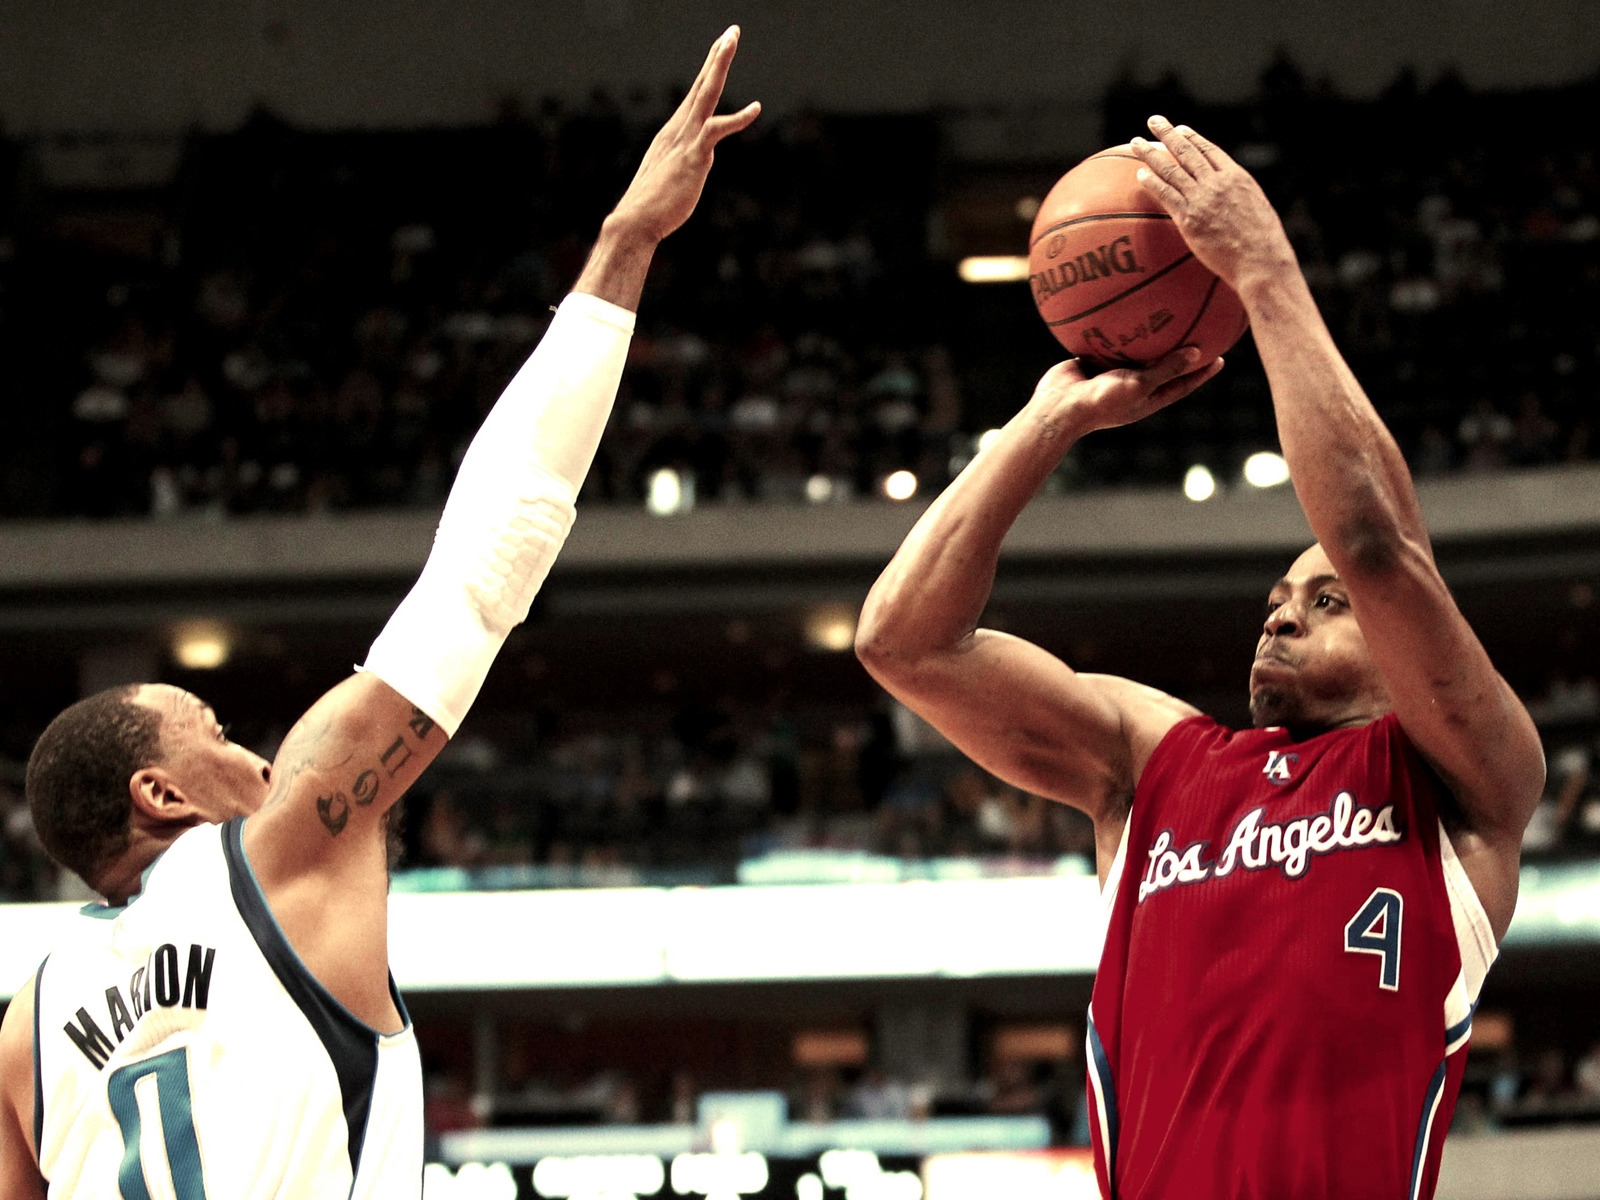 LA Clippers for 1600 x 1200 resolution